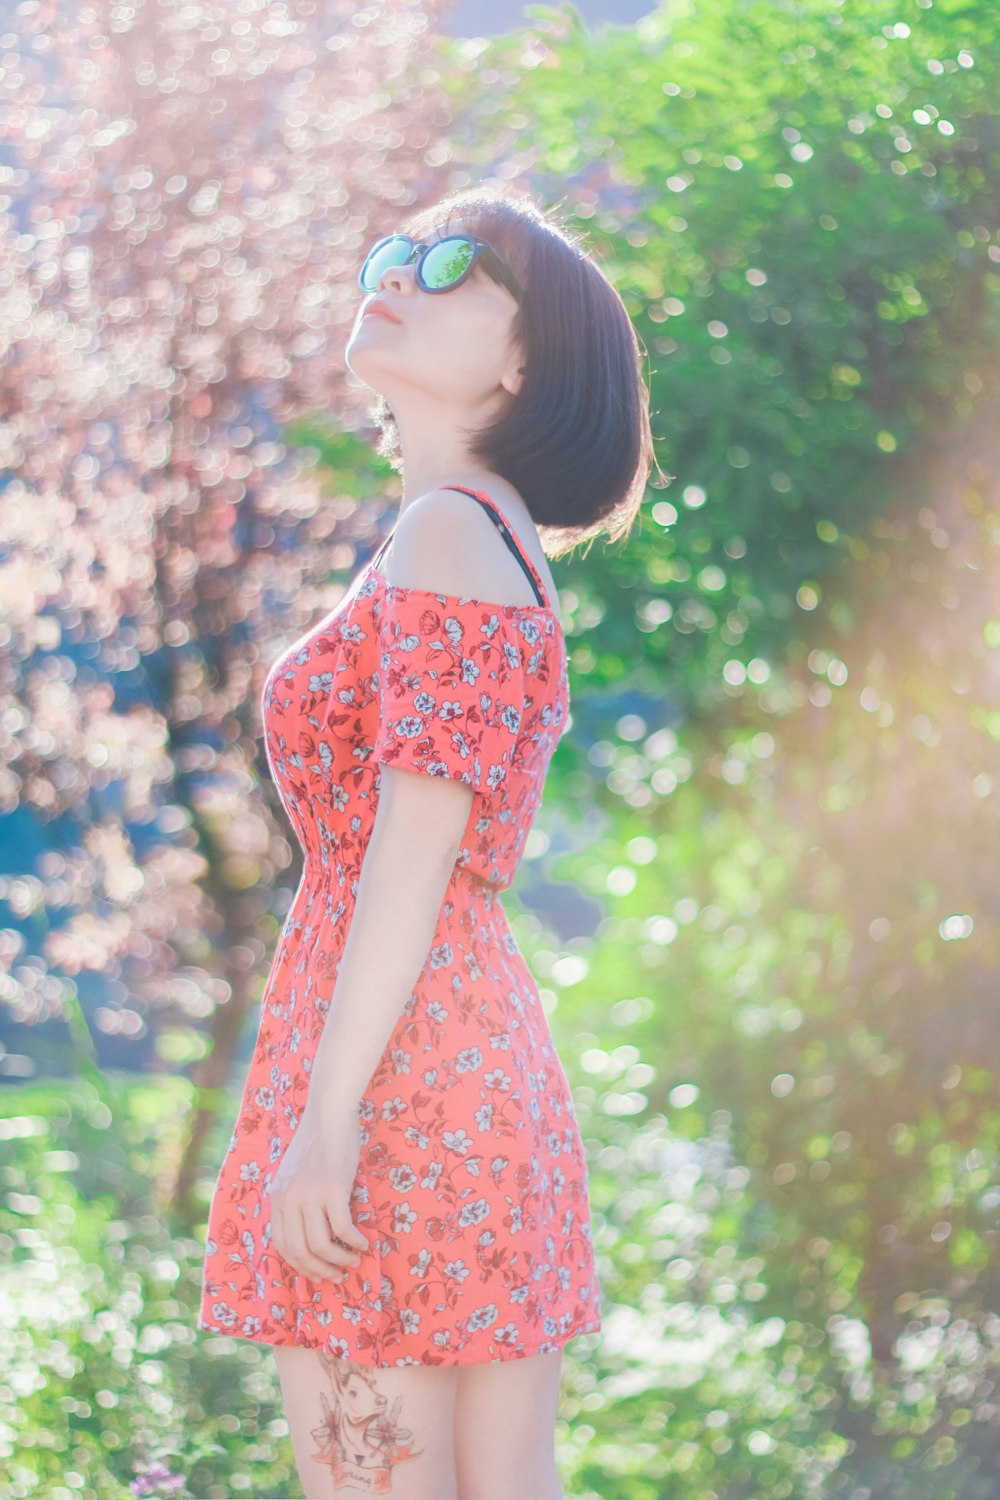 woman wearing dress and sunglasses standing near trees